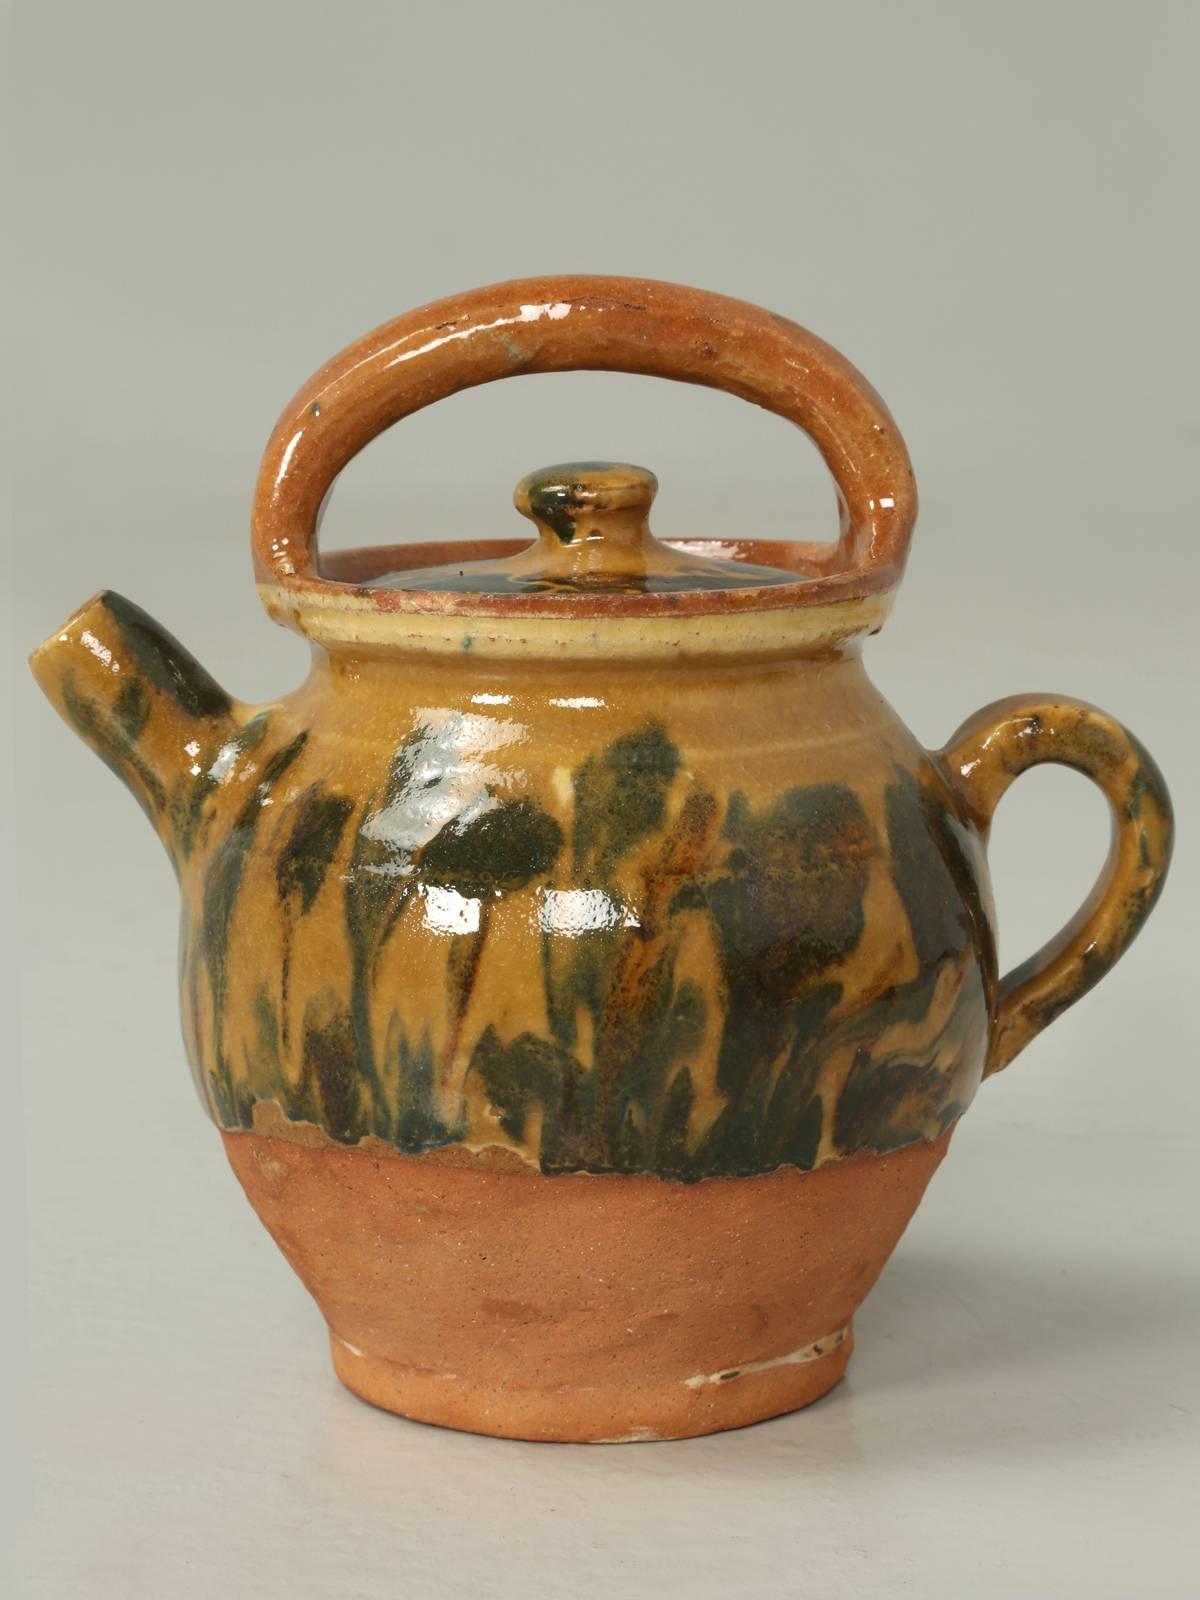 French pottery jug with a non-broken handle and still complete with its original lid. Looks to be circa 1950s and adds a nice touch of French Provence color to any room.